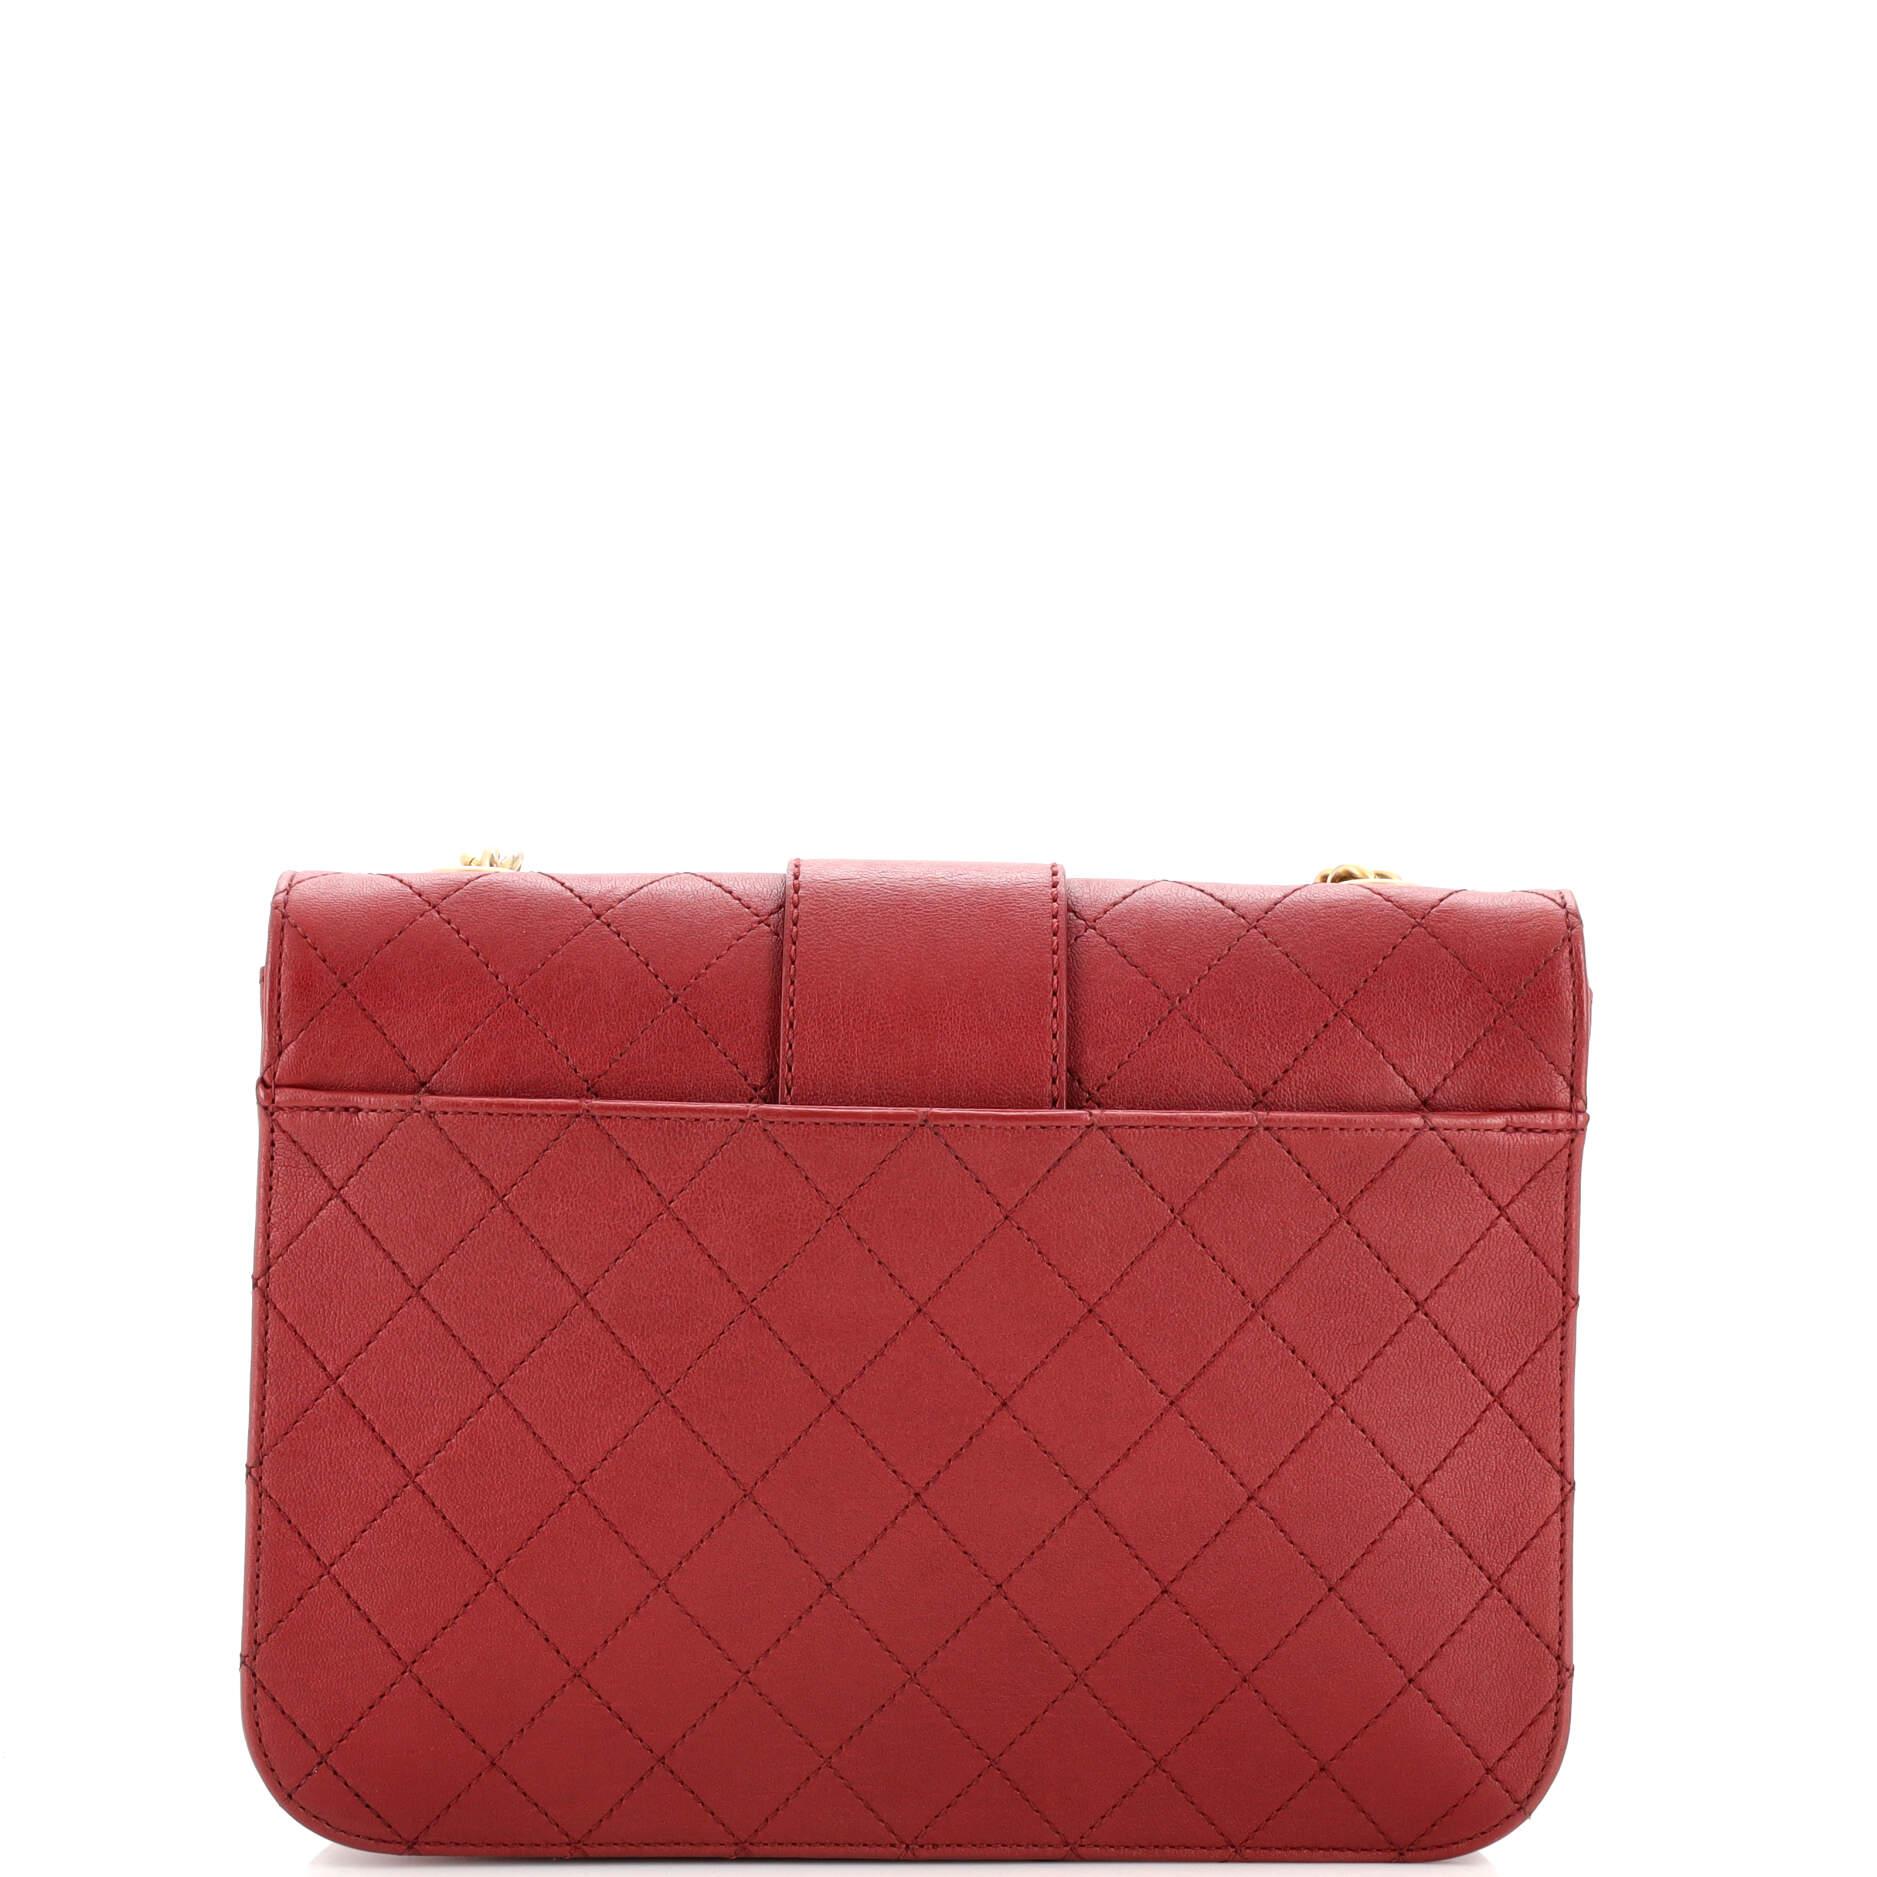 Chanel Front Chain Flap Bag Quilted Sheepskin Large In Good Condition For Sale In NY, NY